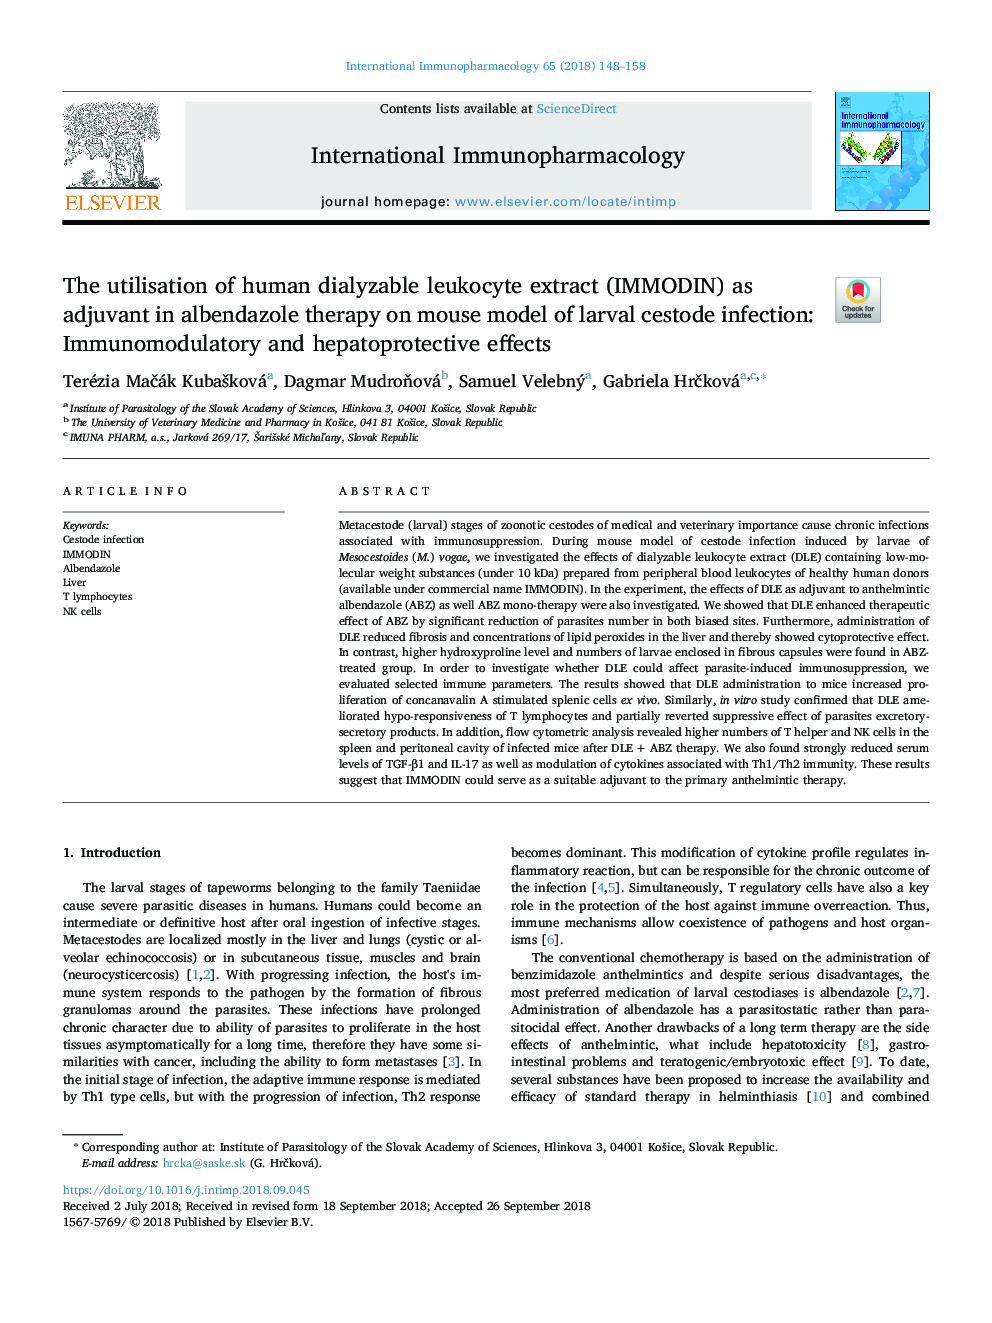 The utilisation of human dialyzable leukocyte extract (IMMODIN) as adjuvant in albendazole therapy on mouse model of larval cestode infection: Immunomodulatory and hepatoprotective effects